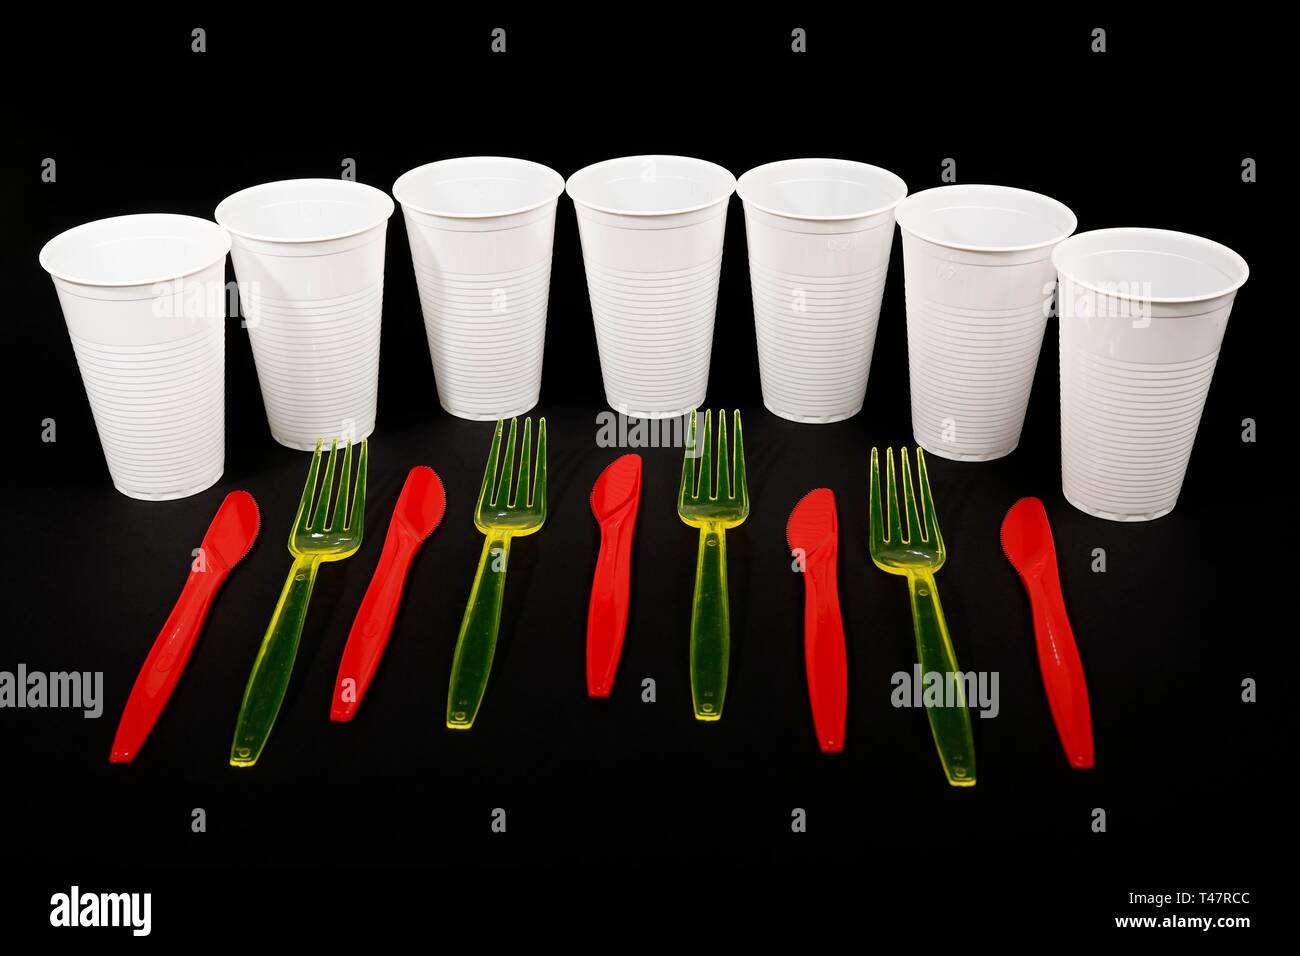 Red and yellow plastic cutlery, plastic knives, plastic forks, white plastic cups, plastic waste, Germany Stock Photo